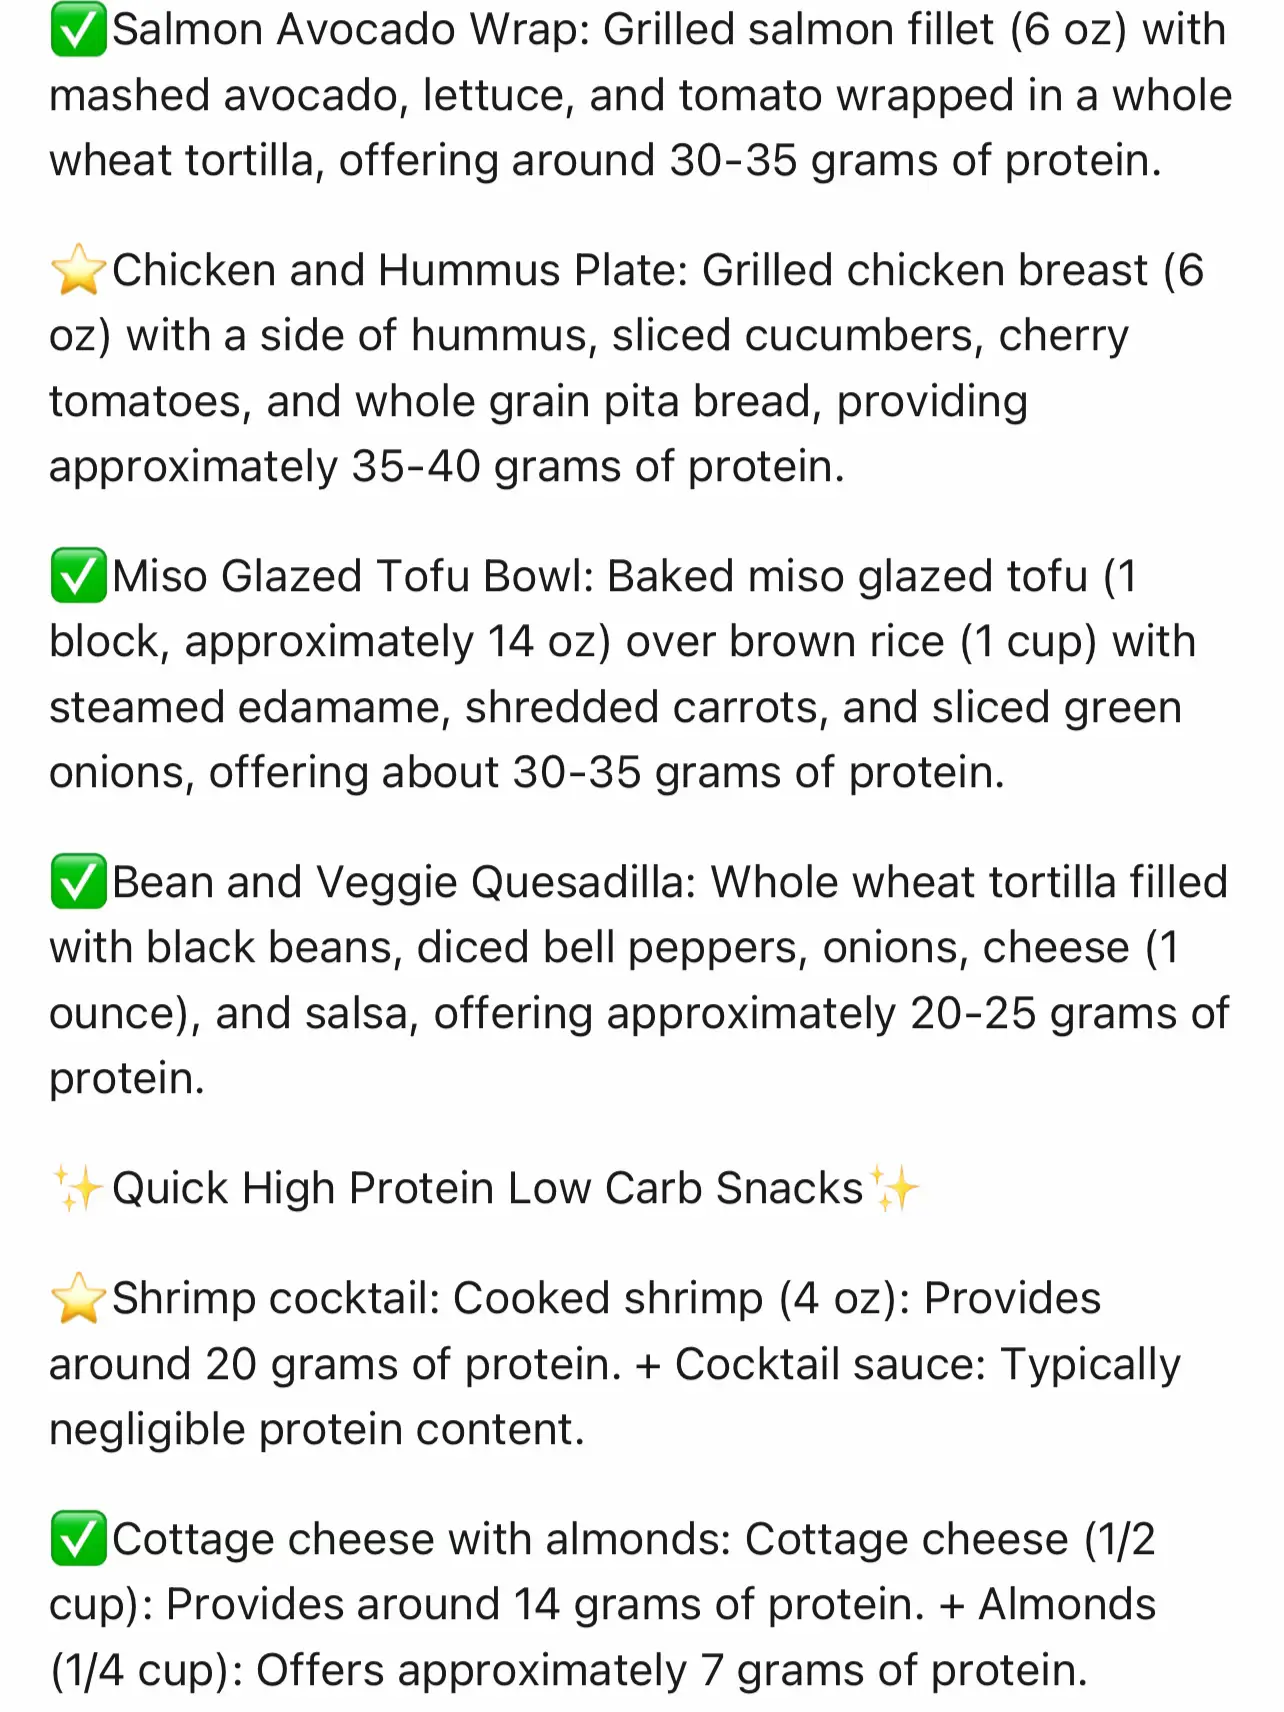 LOW CALORIE HIGH PROTEIN FOOD SHOP⤵️ If you're getting the right foods